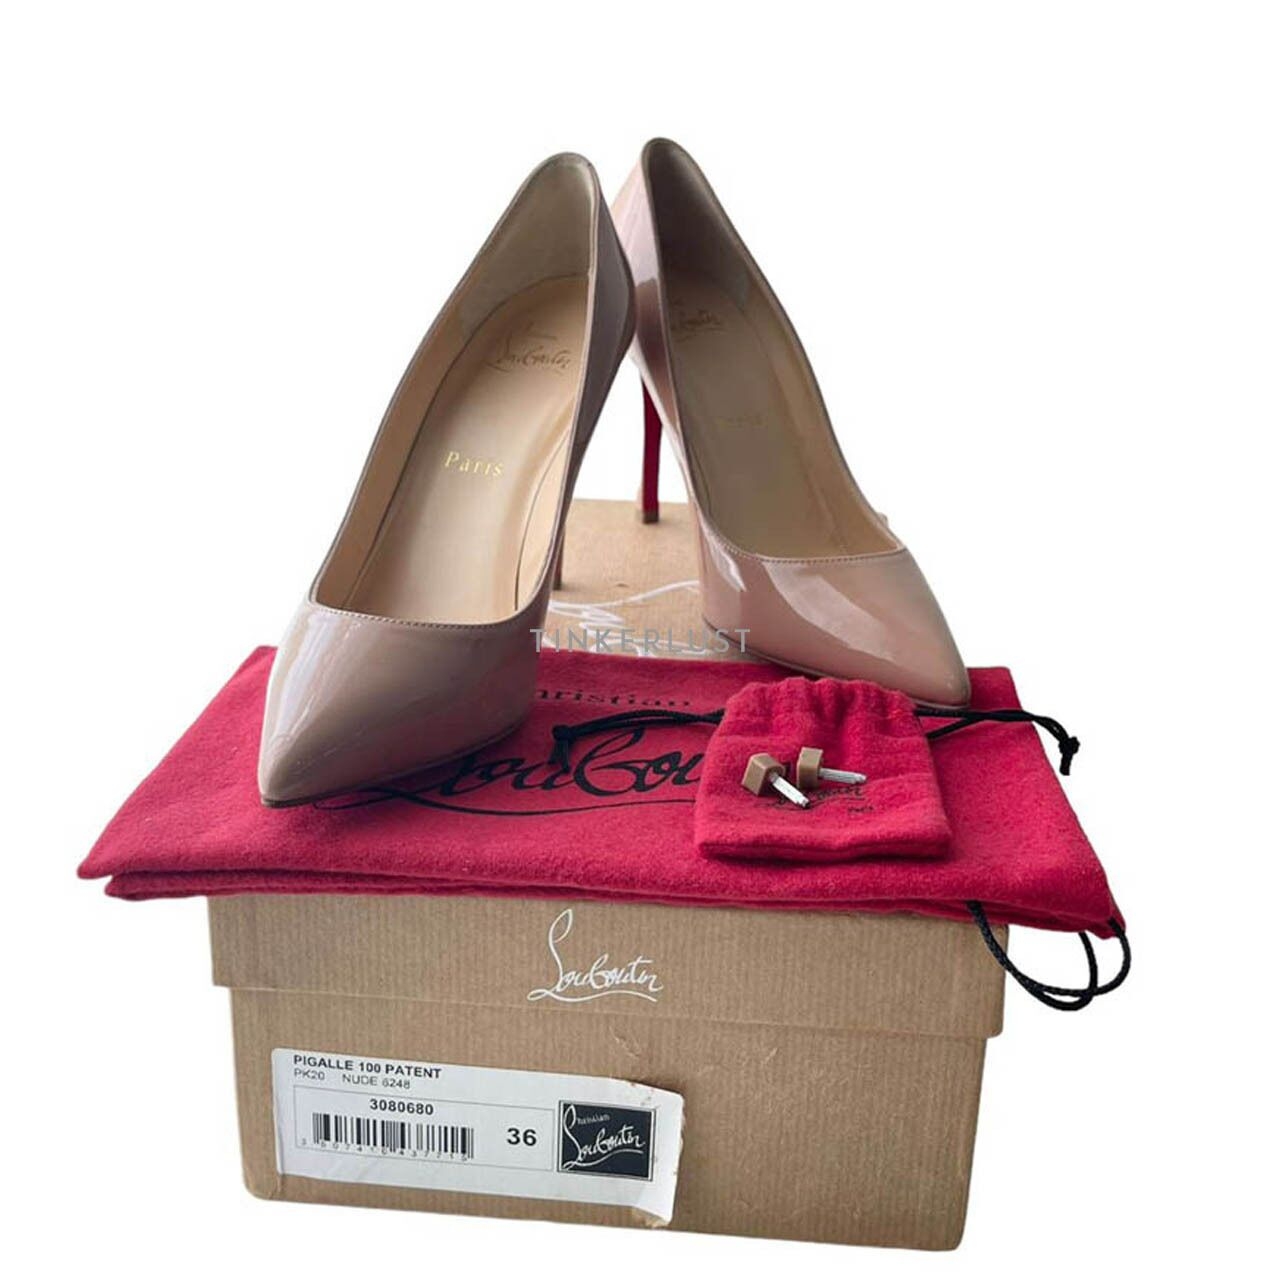 Christian Louboutin Pigalle 10cm Nude Patent Heels